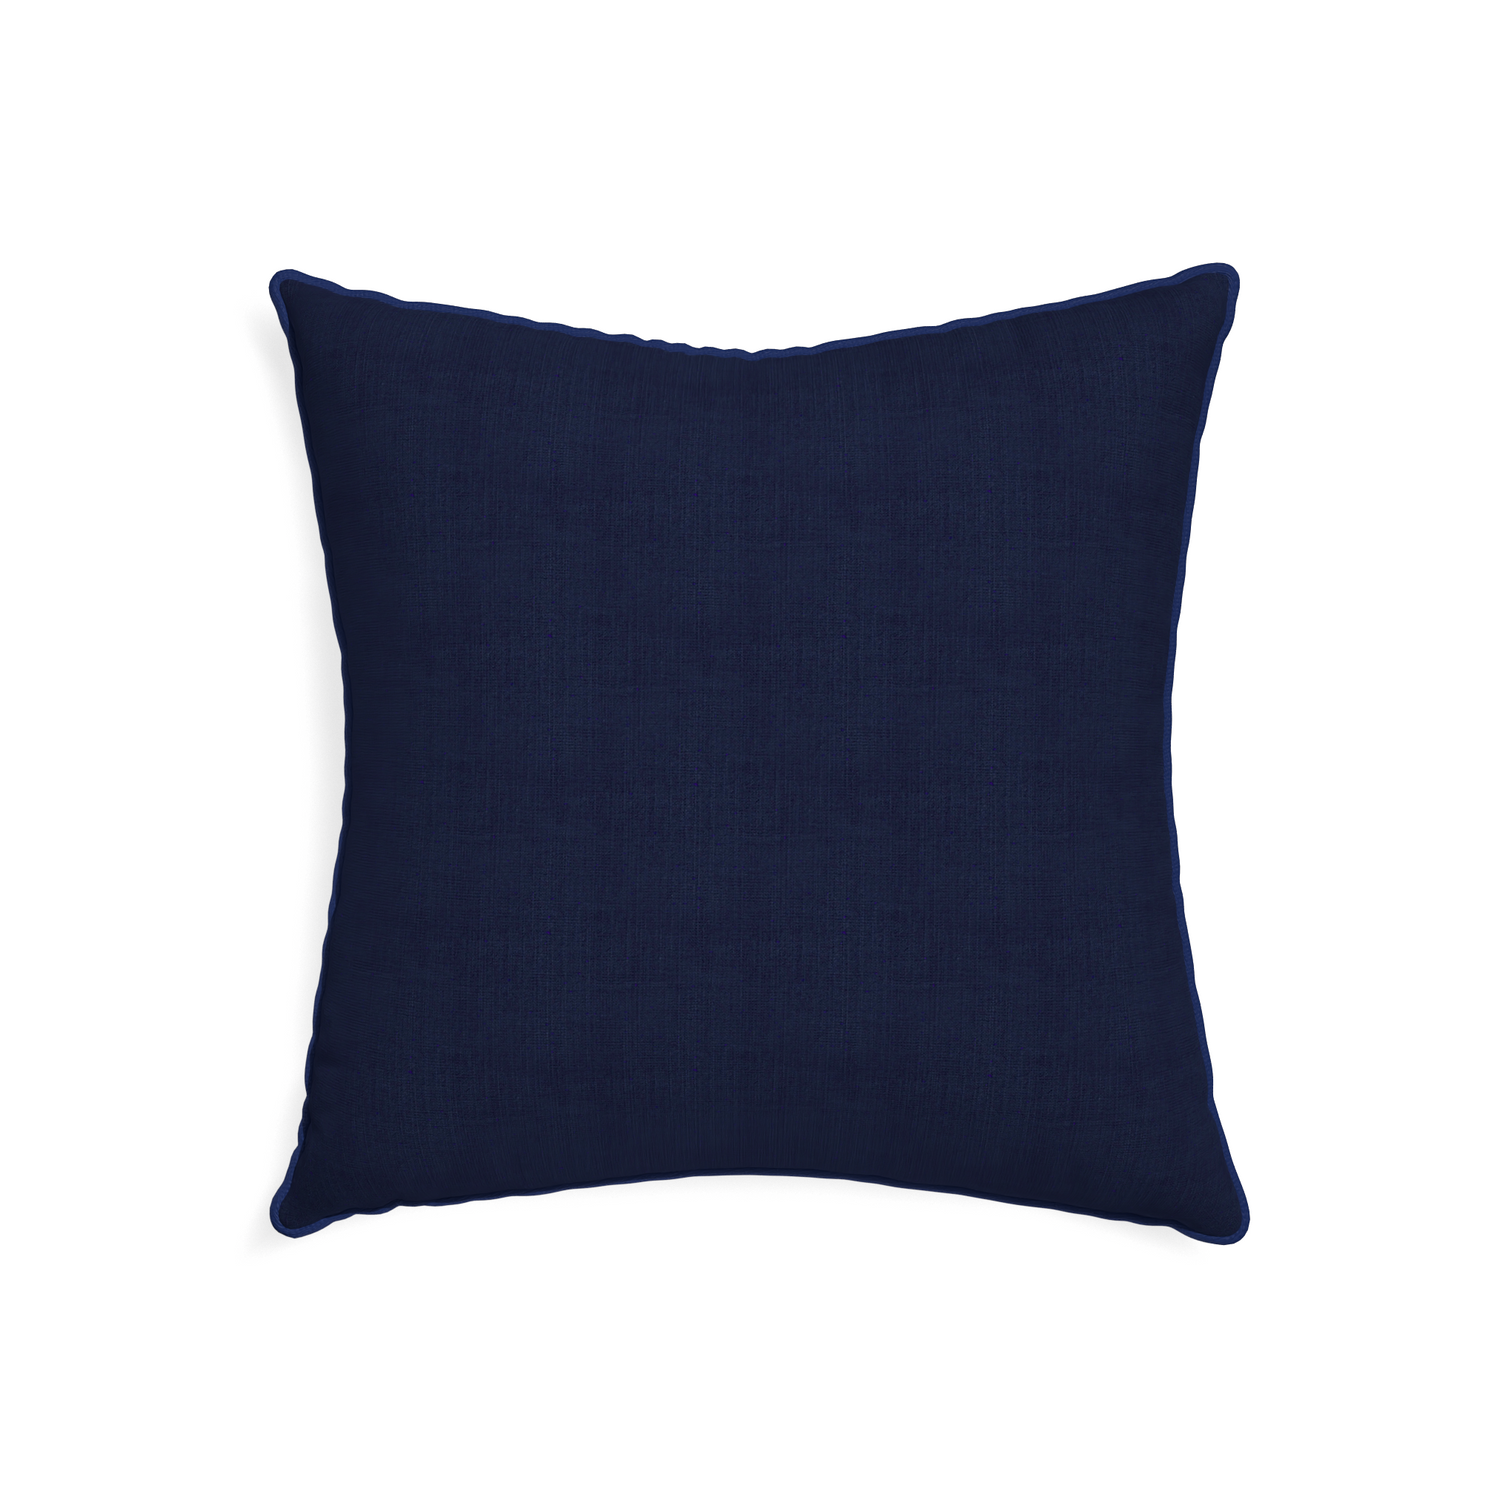 22-square midnight custom navy bluepillow with midnight piping on white background